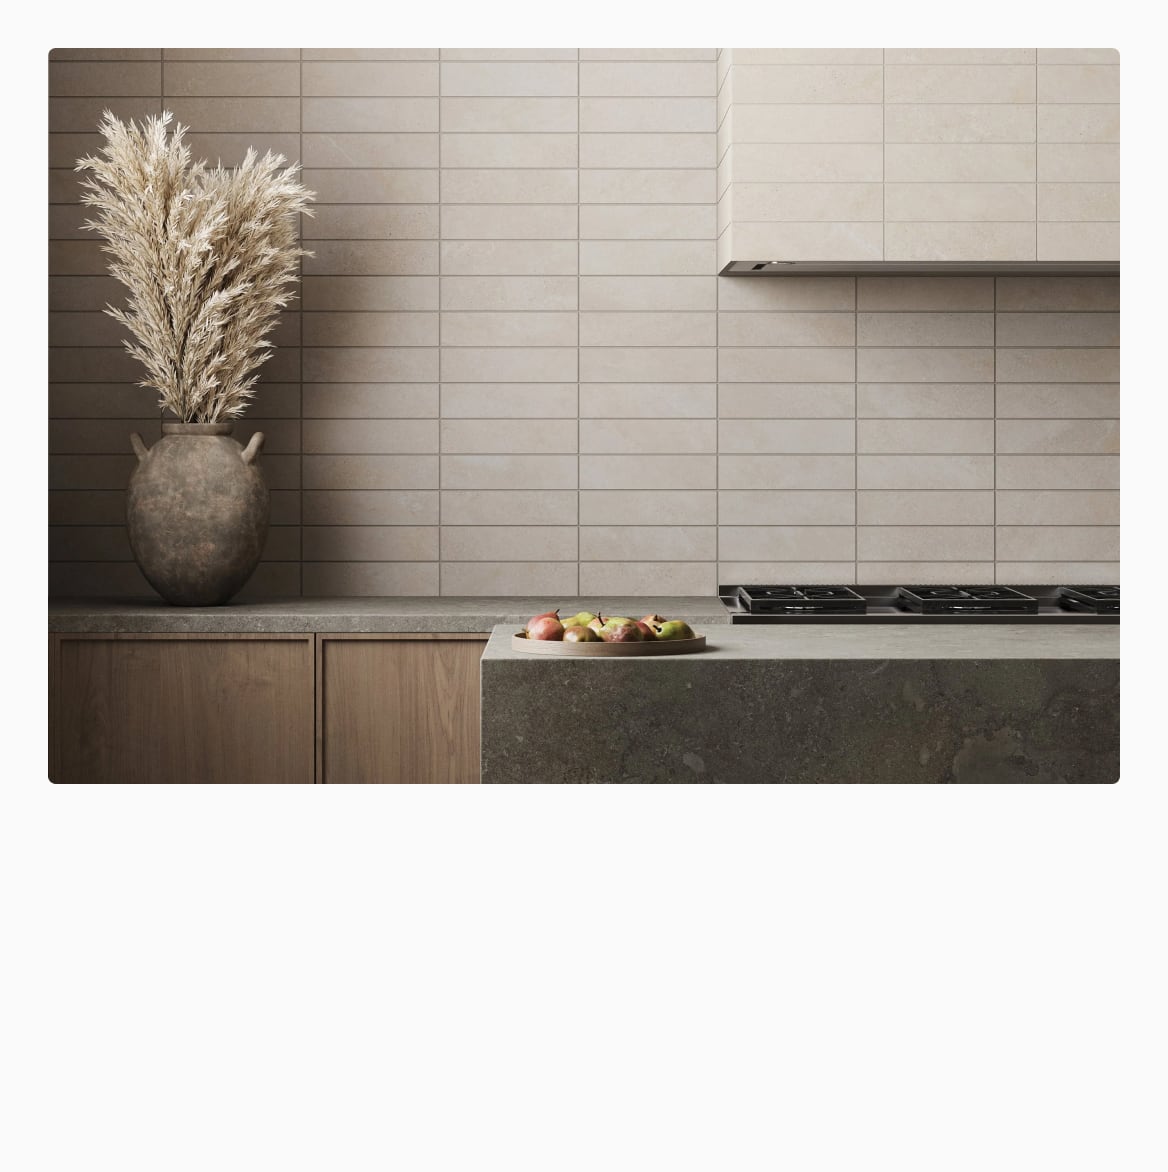 Contemporary kitchen showcasing wall tiles, blending functionality with style for a sleek, modern look